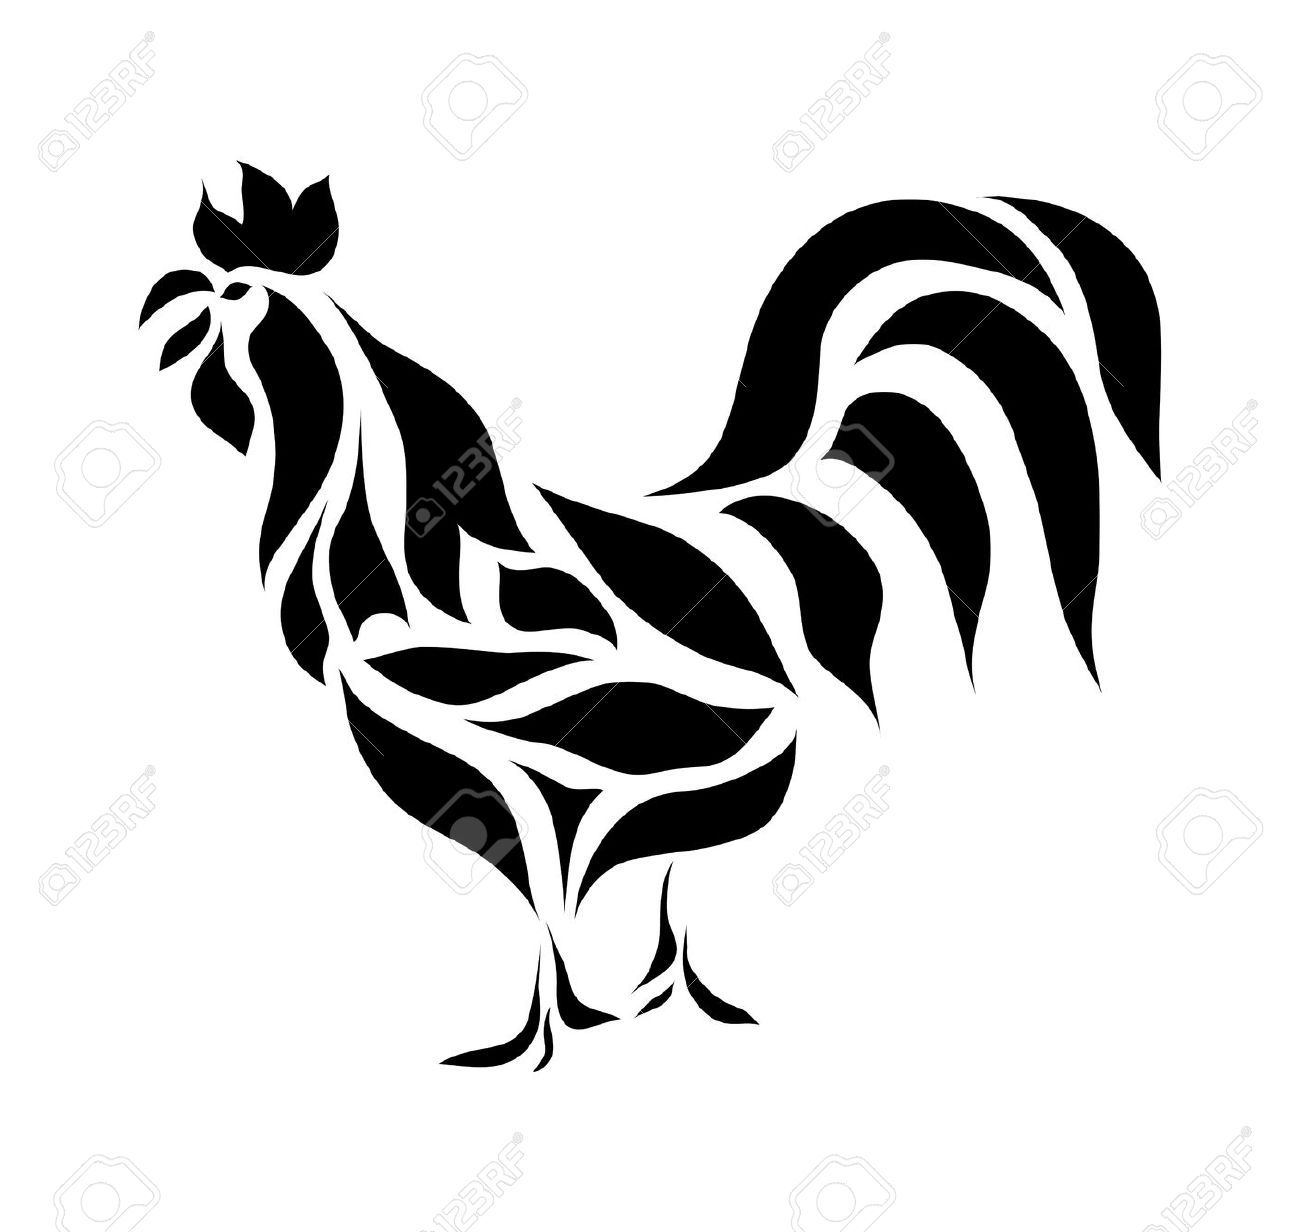 rooster clipart black and white.